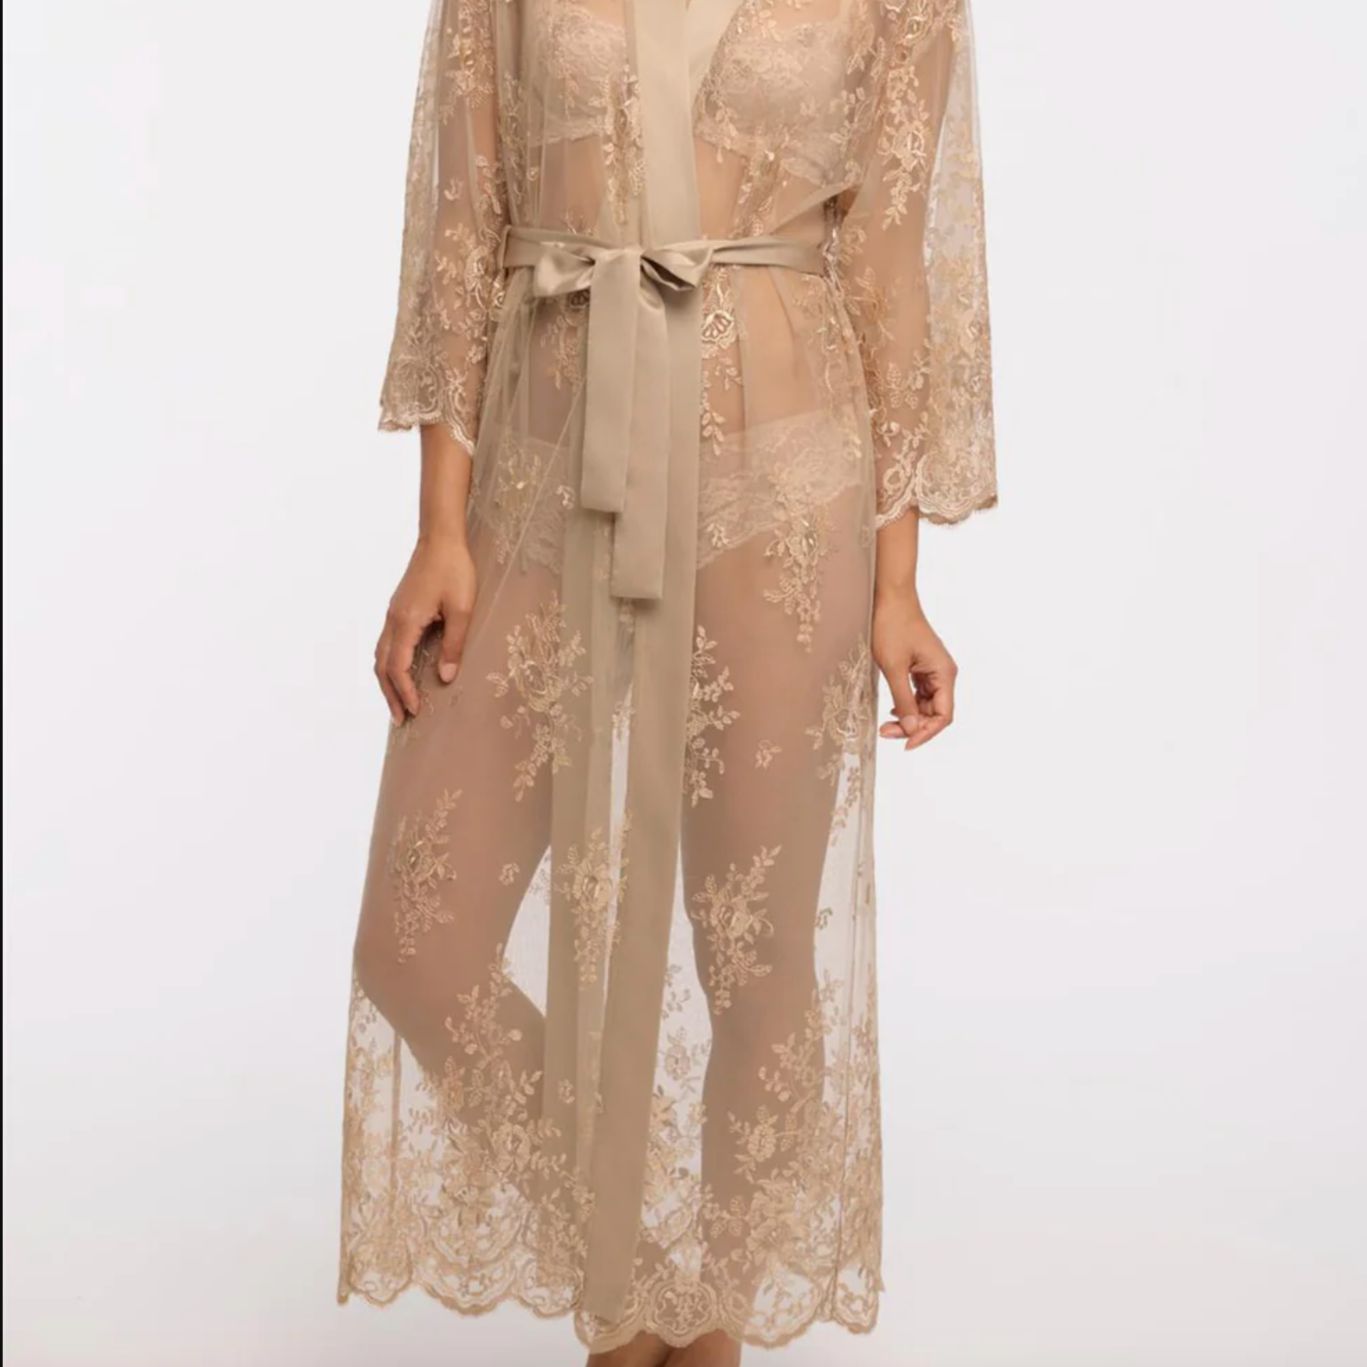 Rya Collection Darling Long Robe 220 in Latte-Robes-Rya Collection-Latte-XSmall/Small-Anna Bella Fine Lingerie, Reveal Your Most Gorgeous Self!